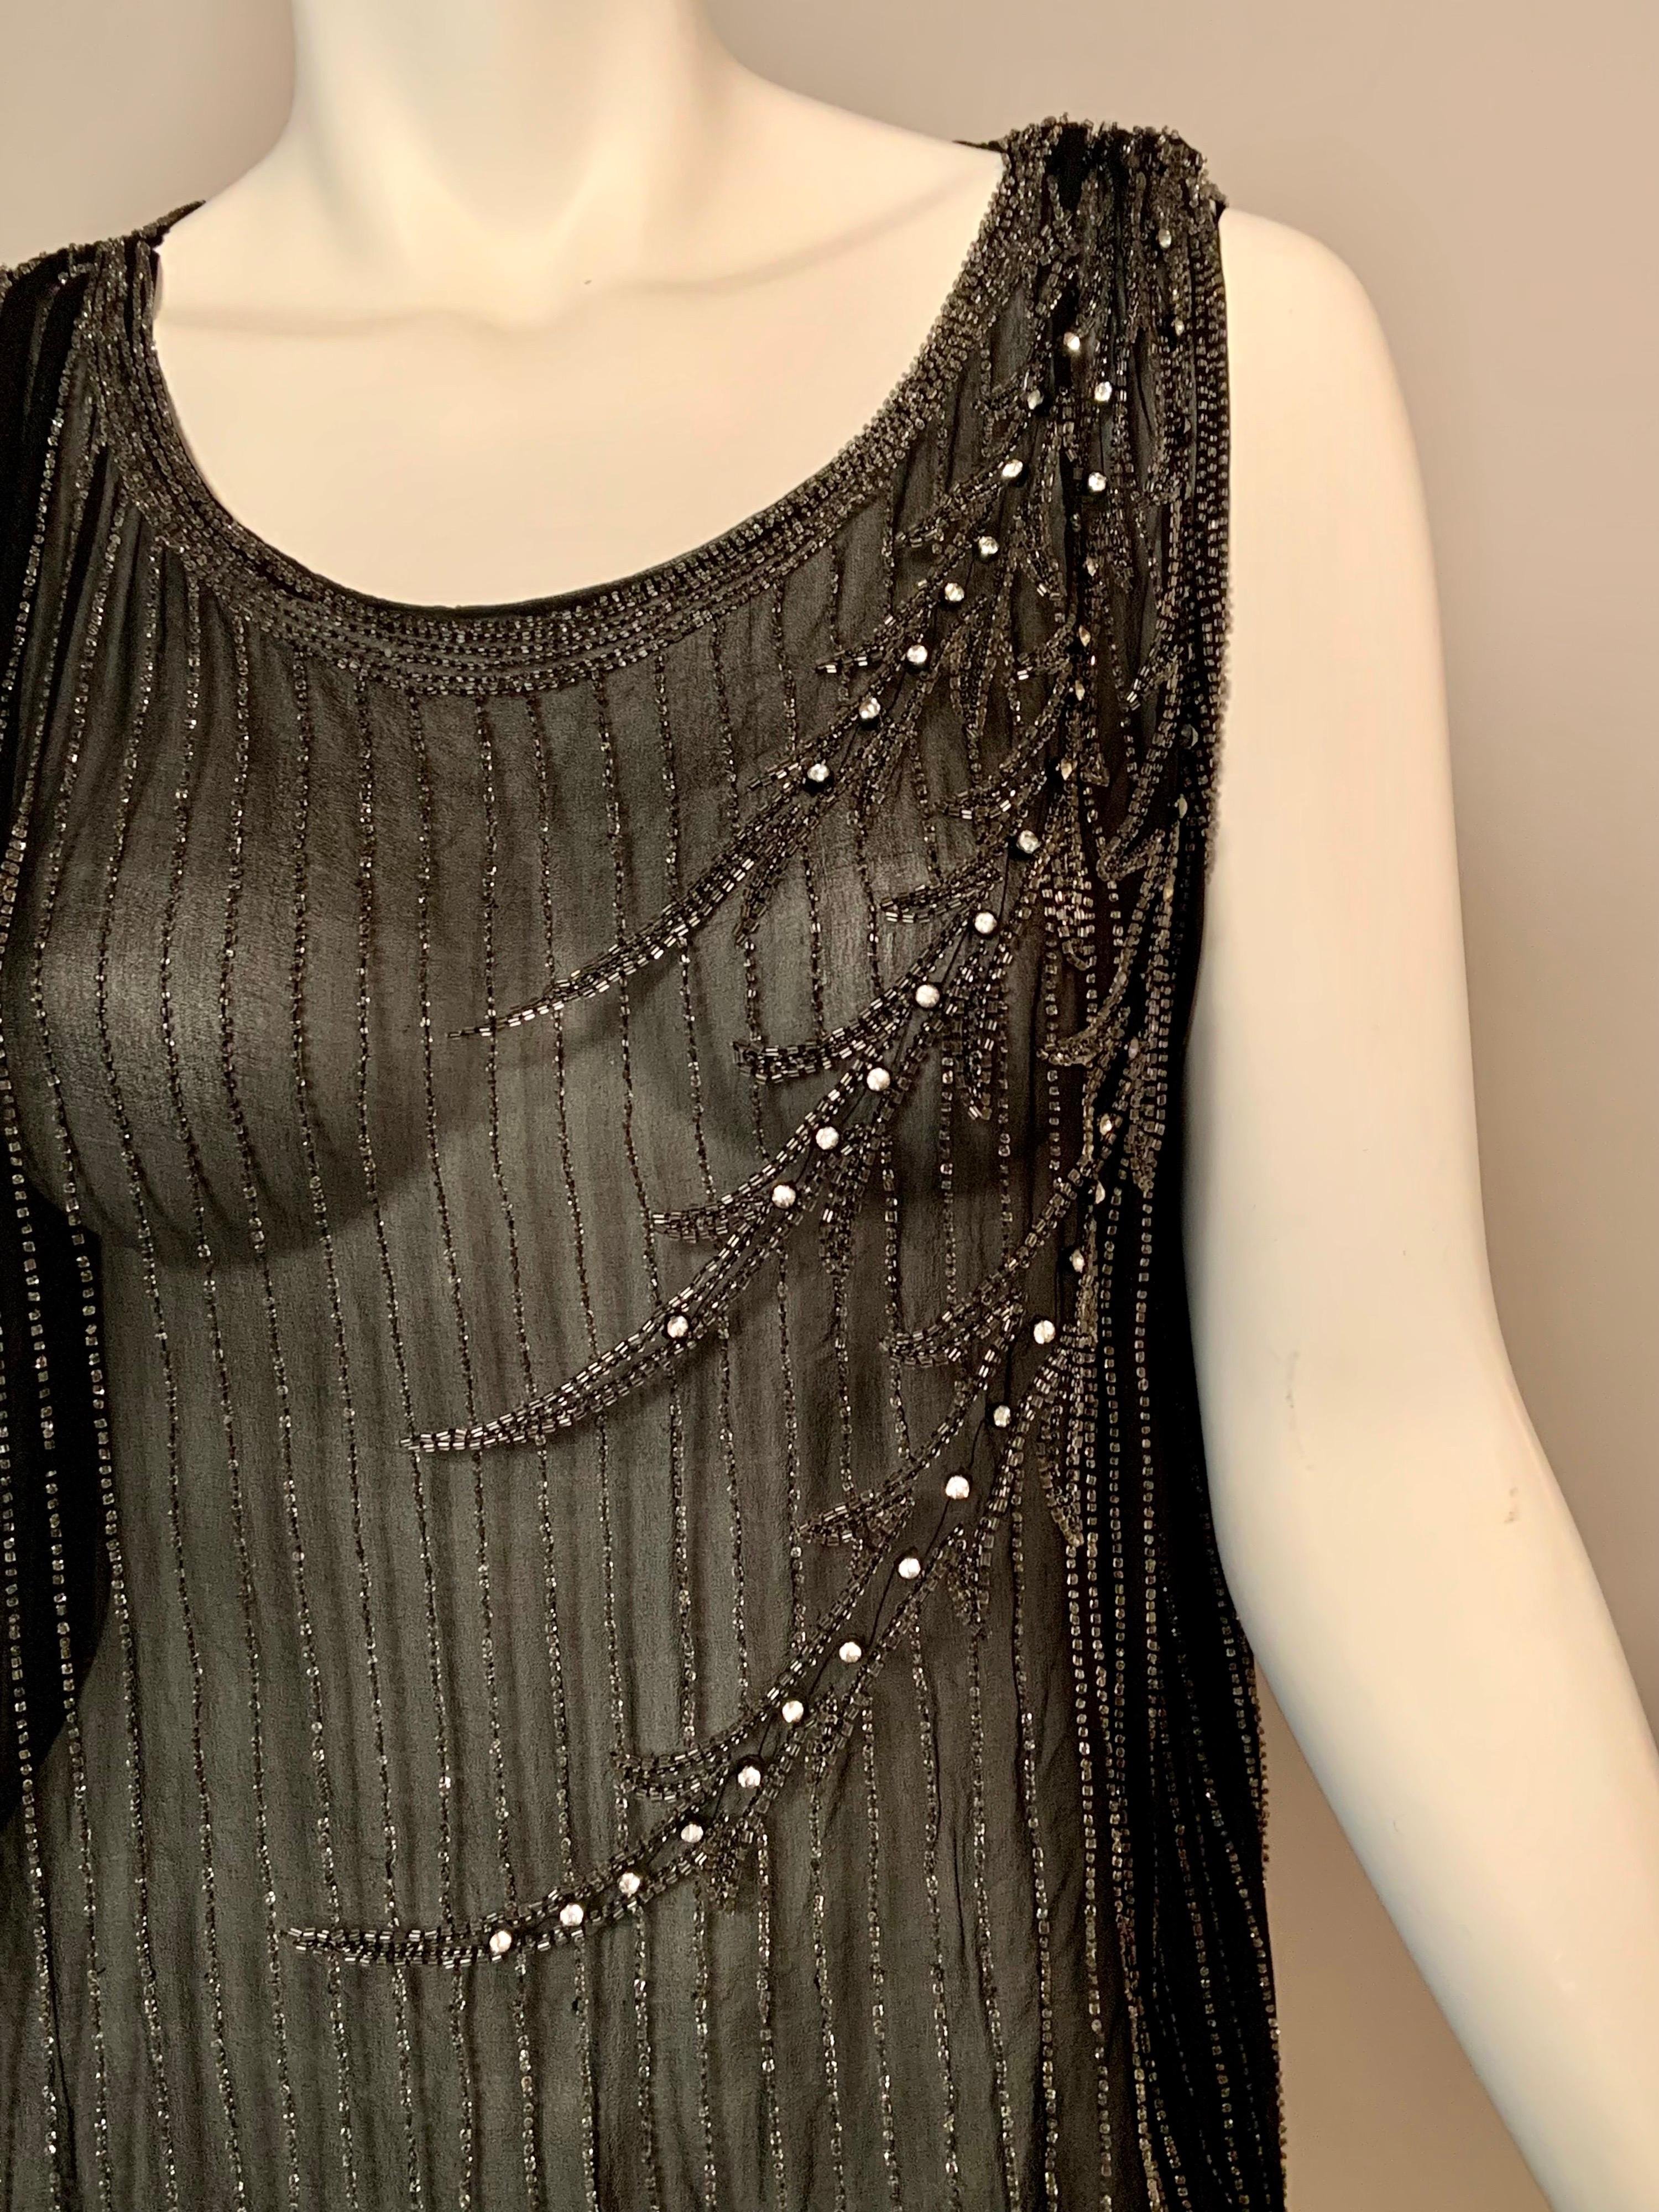 This beautiful French dress from the 1920's is black silk covered with a cascading vertical pattern of small bugle beads, looping back up at the hemline. This is a perfect backdrop for the curving beaded designs on the left side of the dress. These